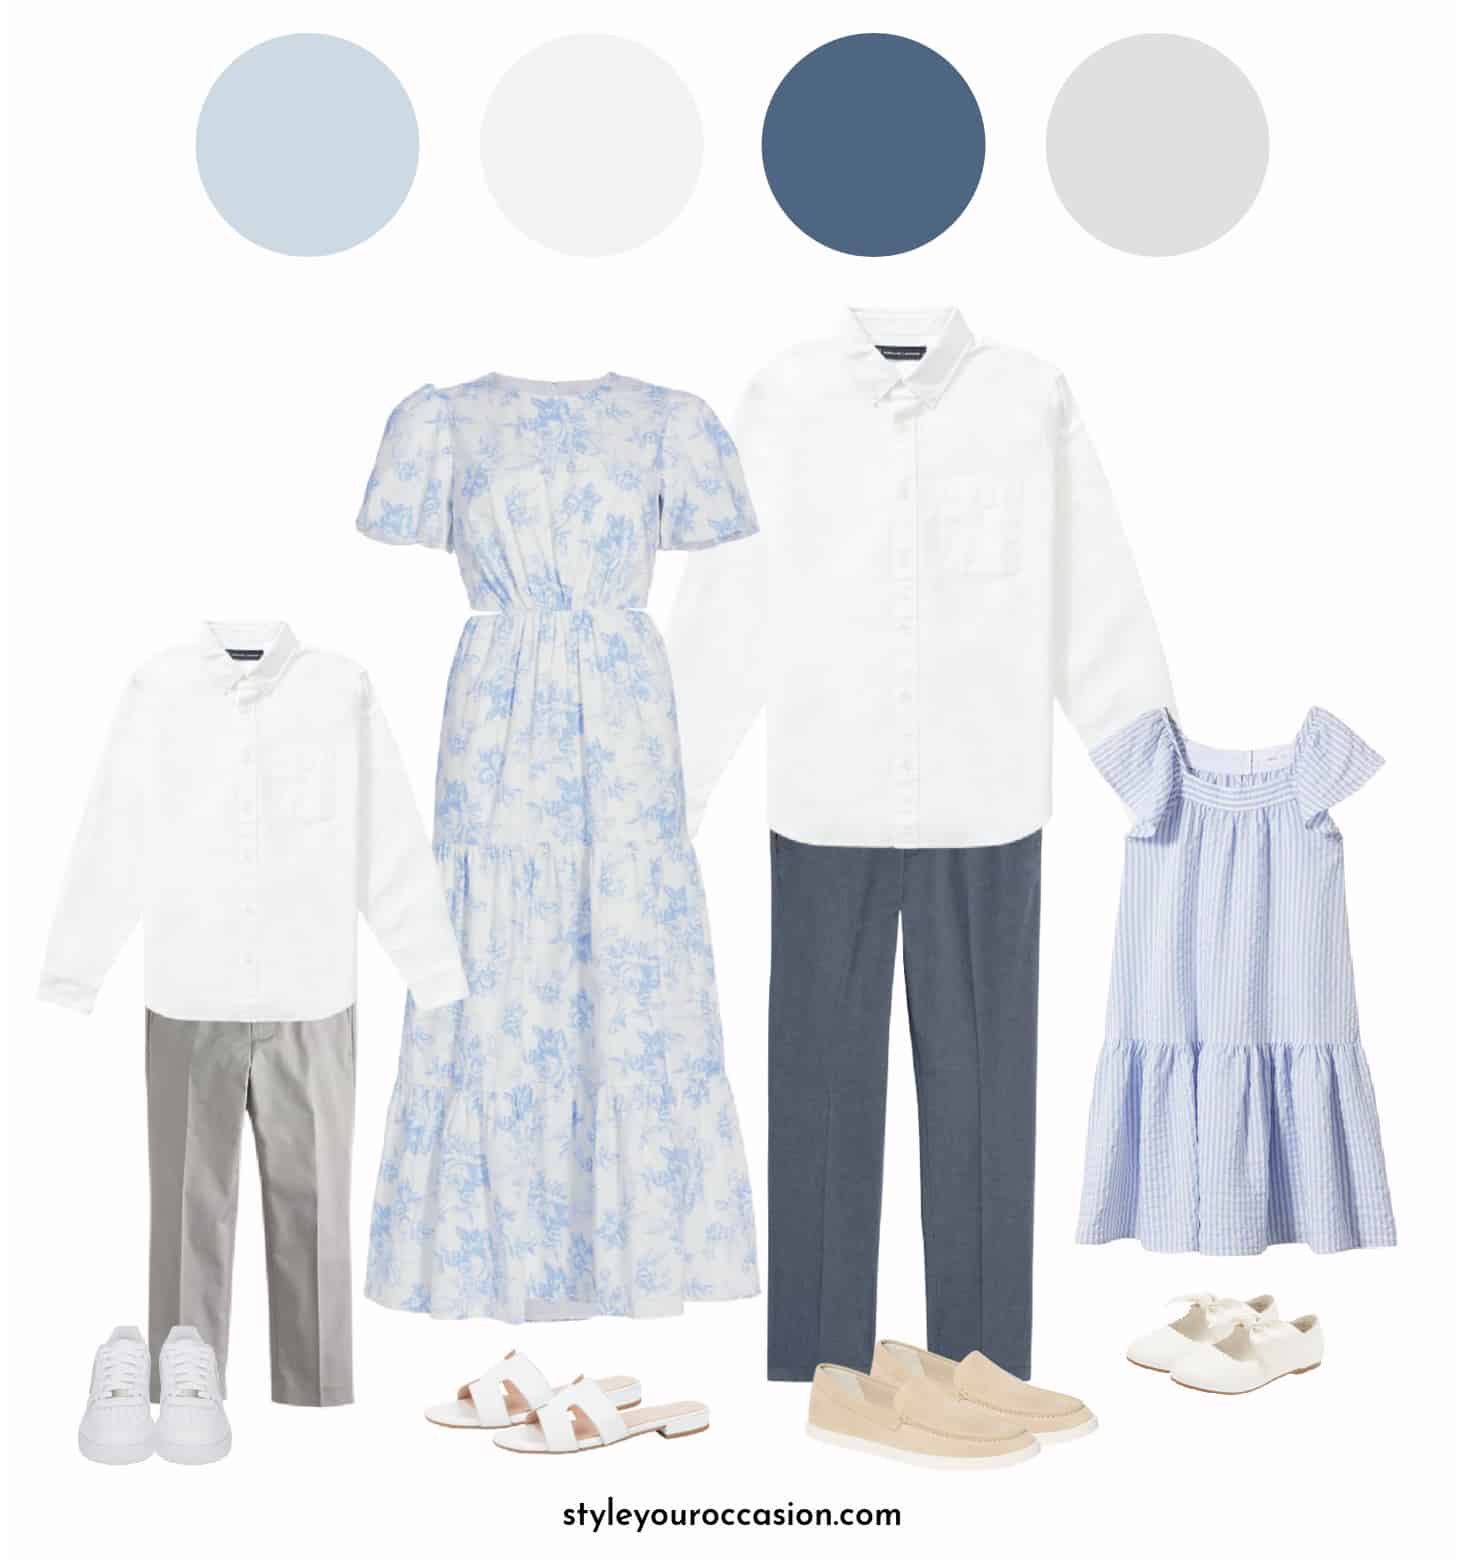 mood board of a family photo outfit guide with light blue colors and whites